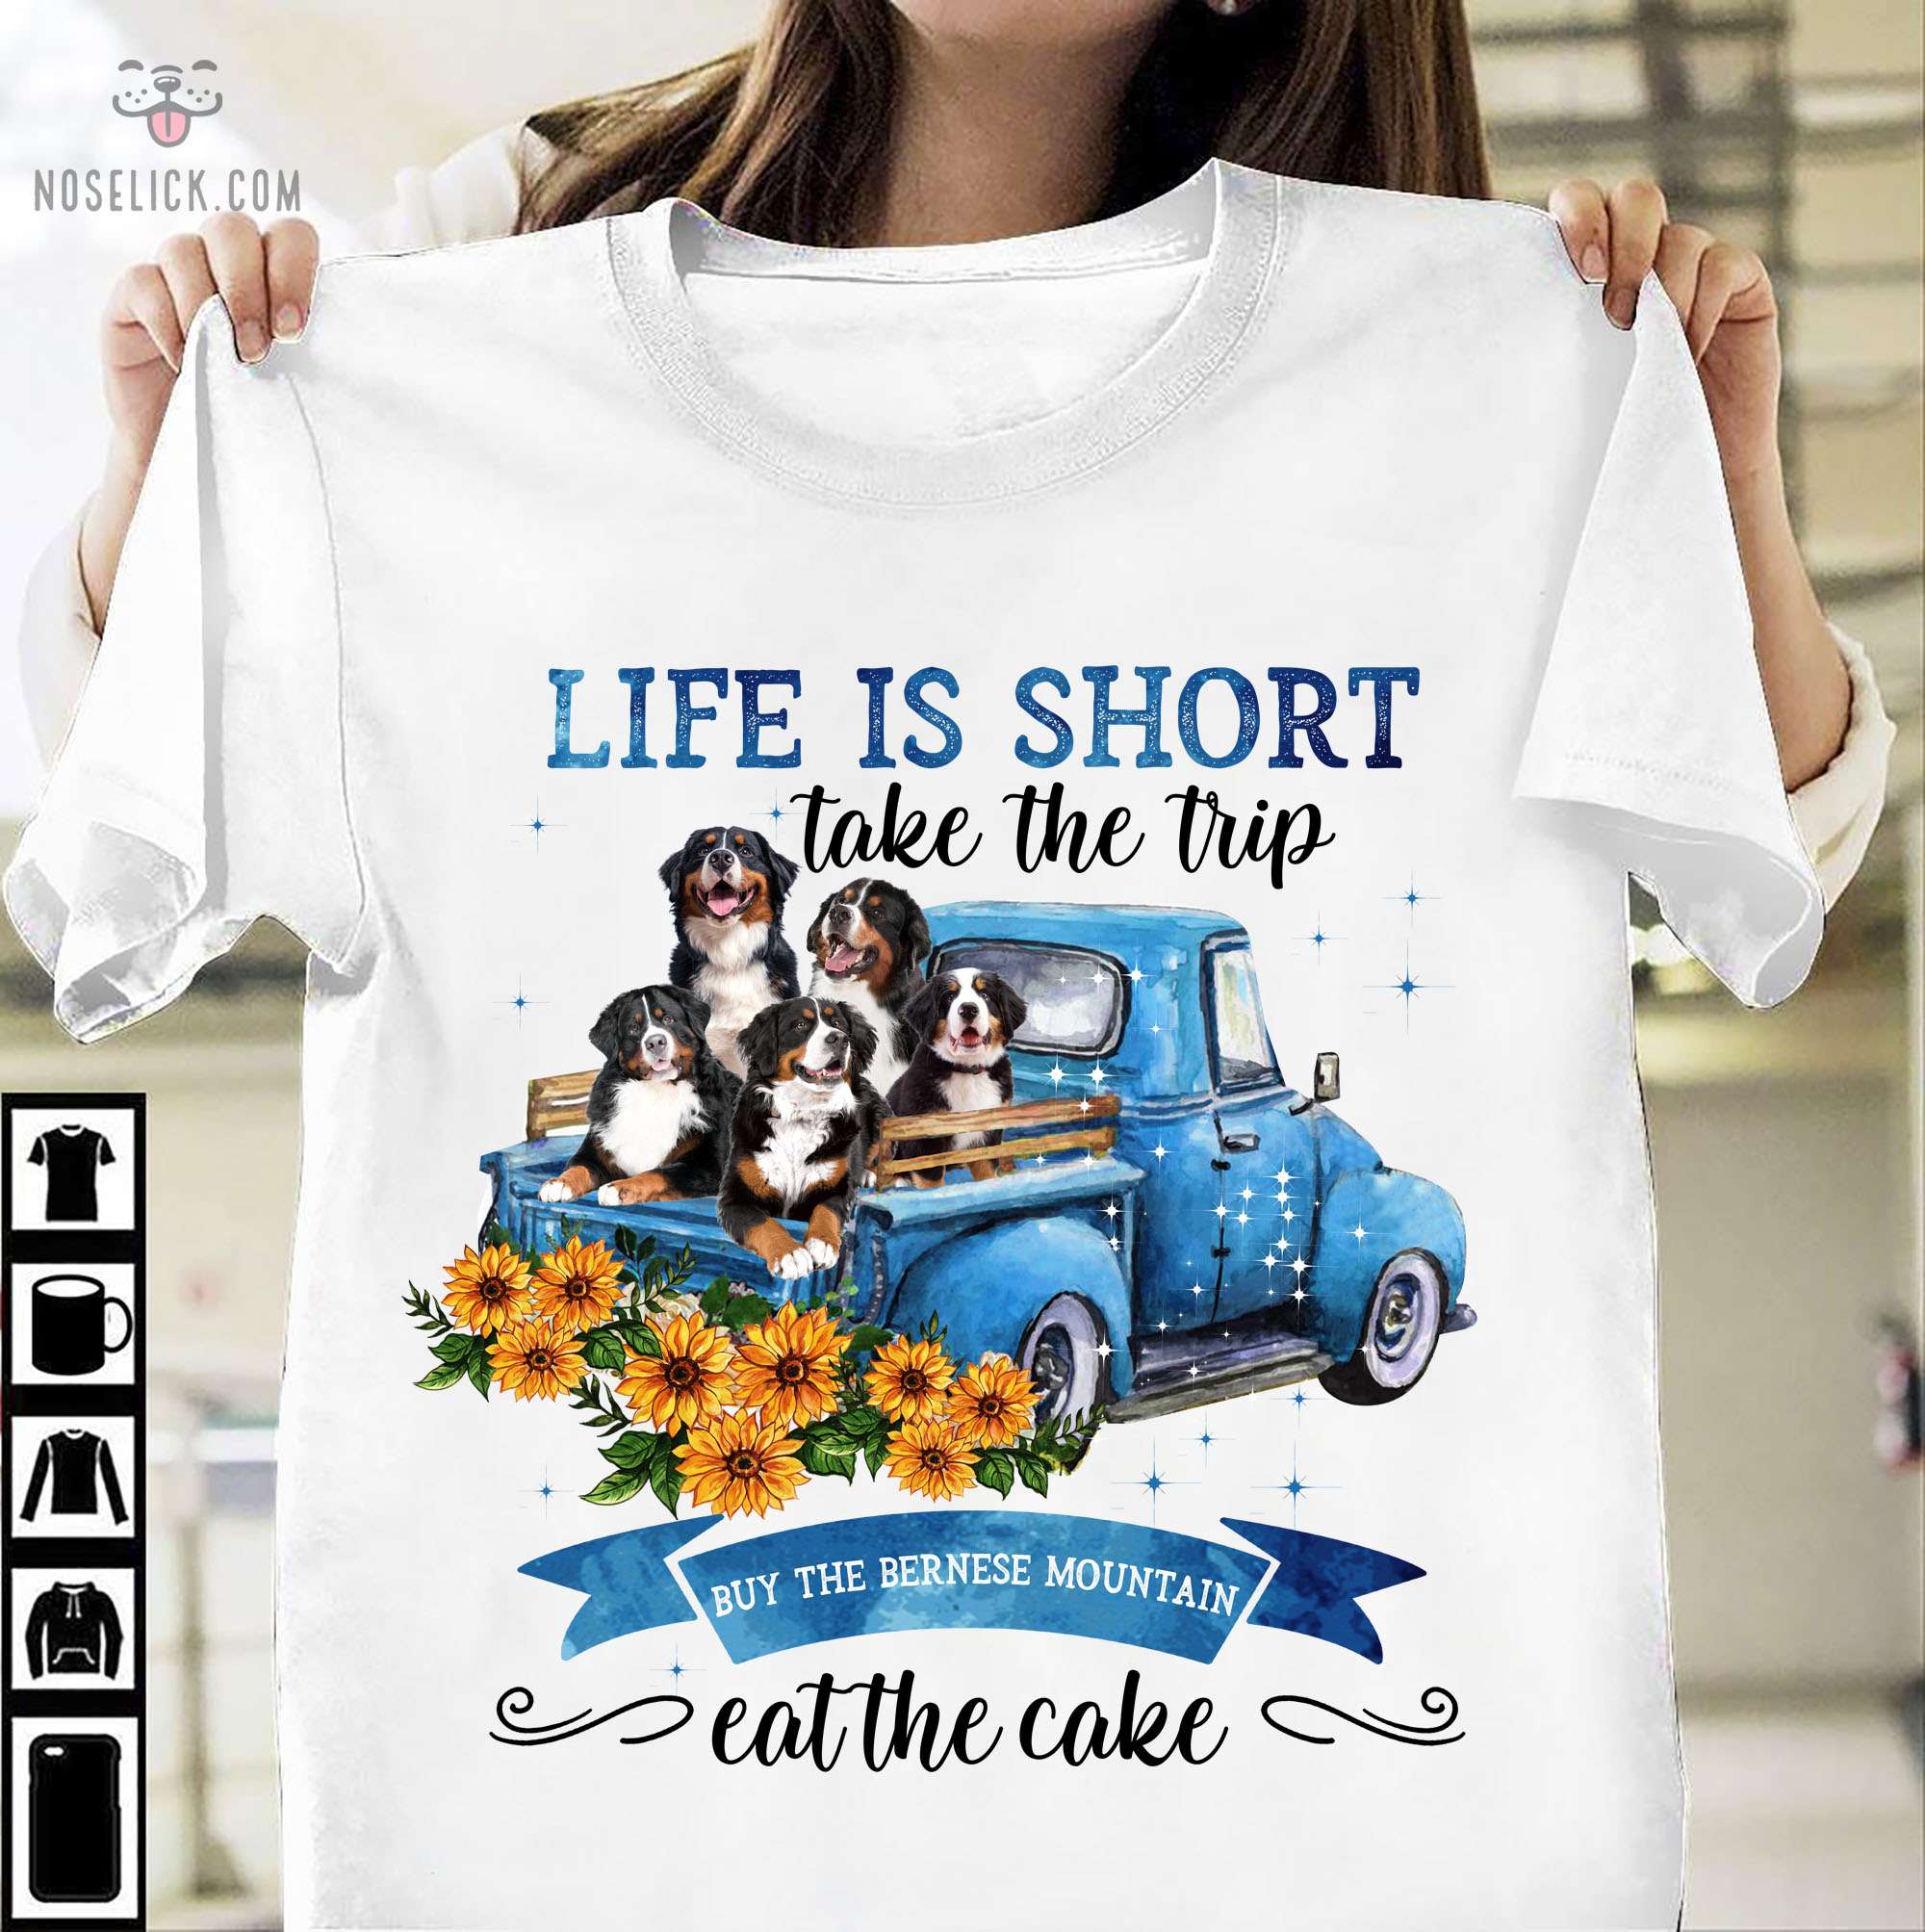 Life is short take the trip buy the Bernese Mountain eat the cake - Bernie mountain on truck